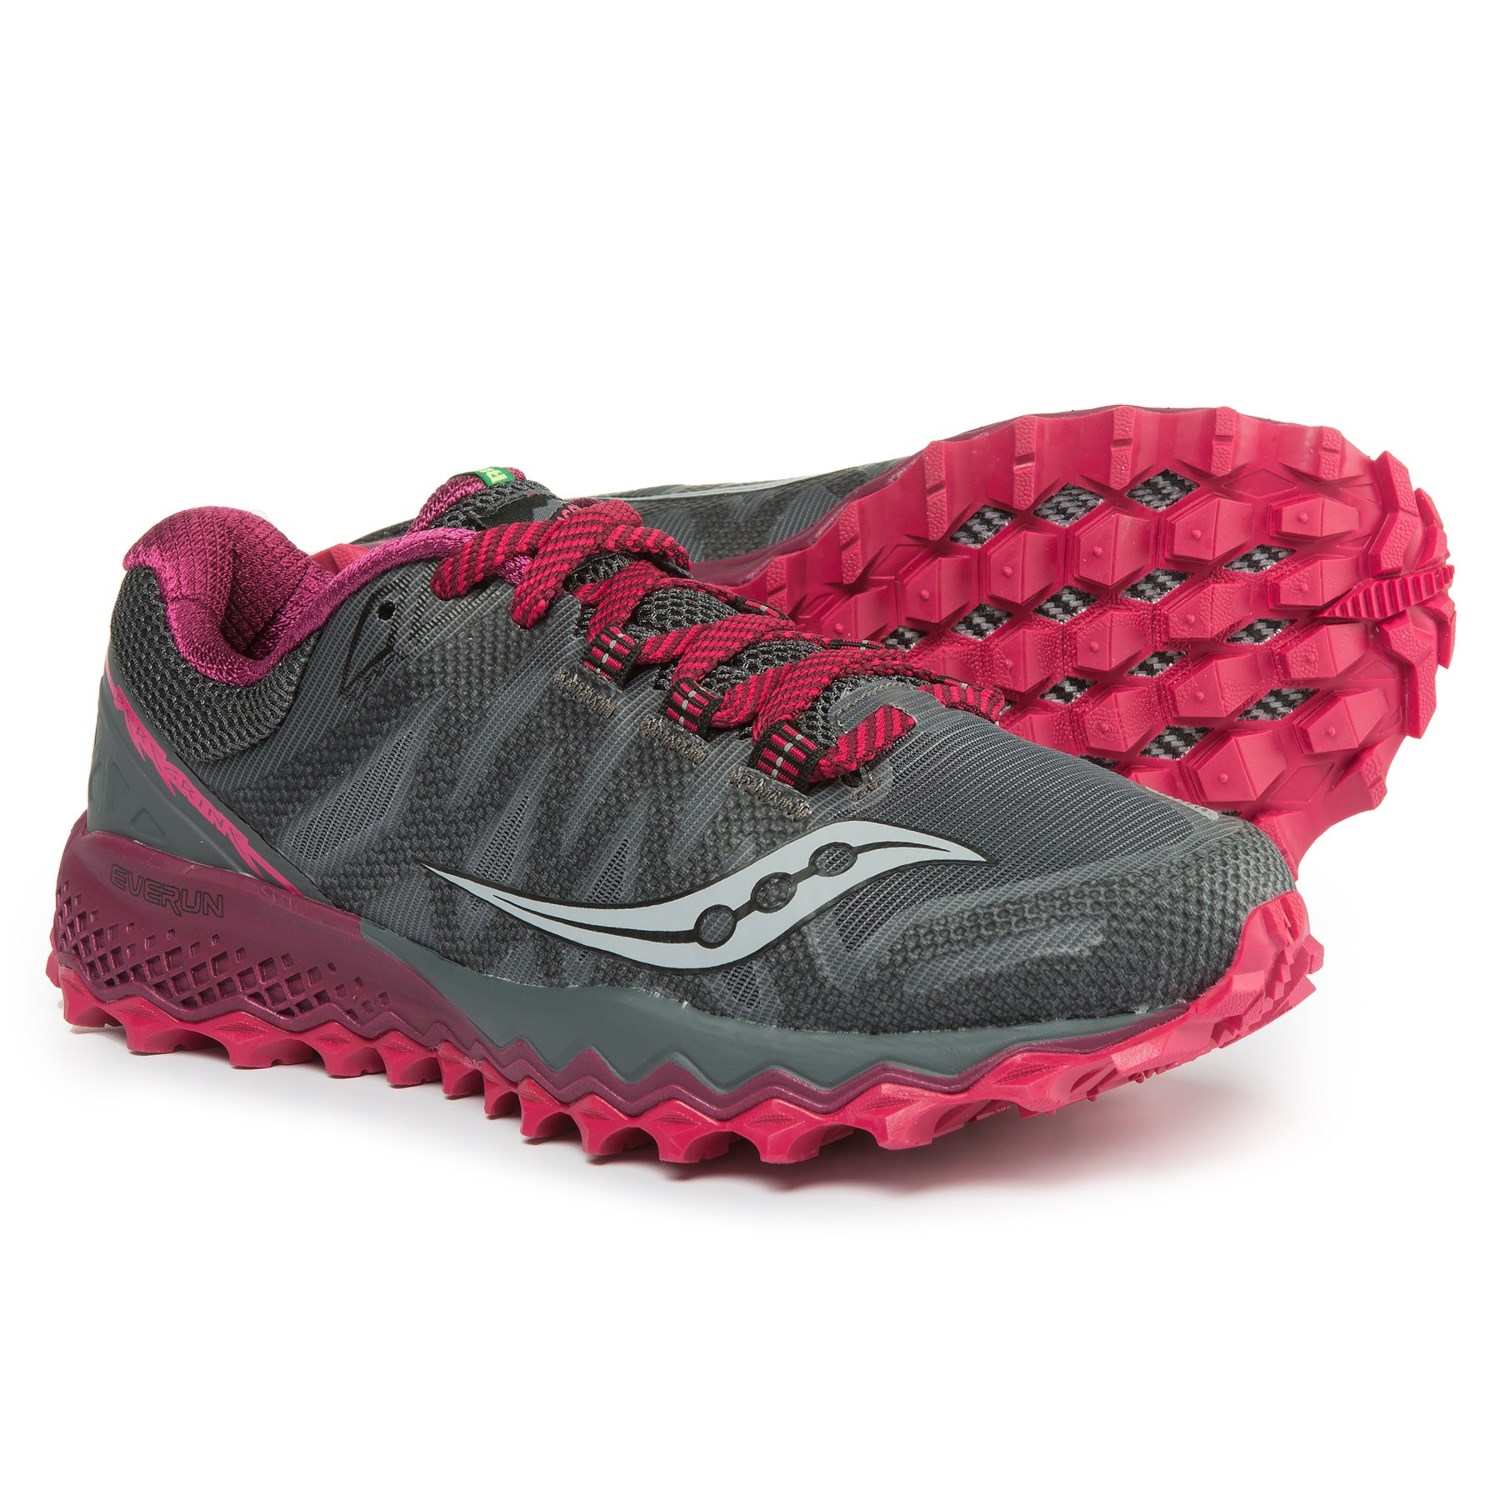 Saucony Peregrine 7 Trail Running Shoes (For Women) - Save 41%